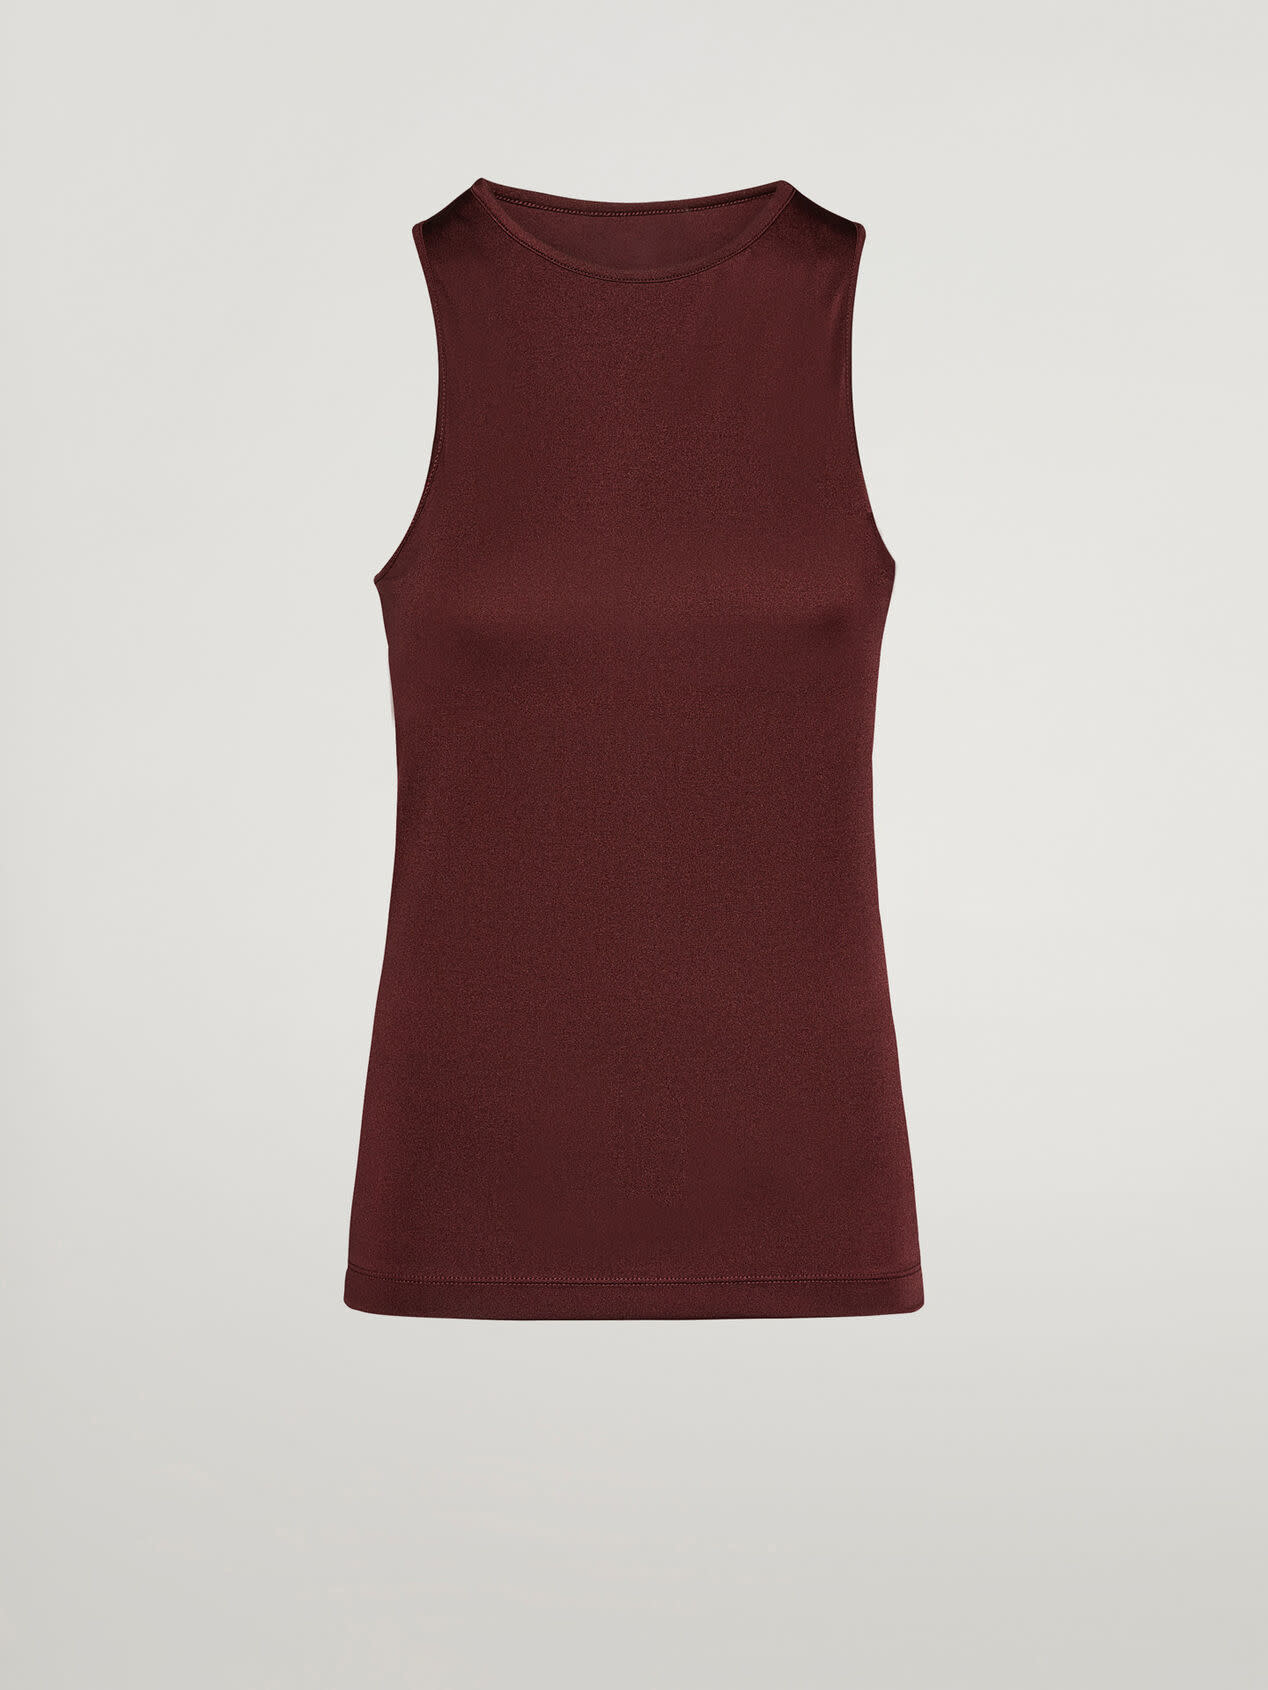 WOLFORD 52988 The Workout Top Sleeveless